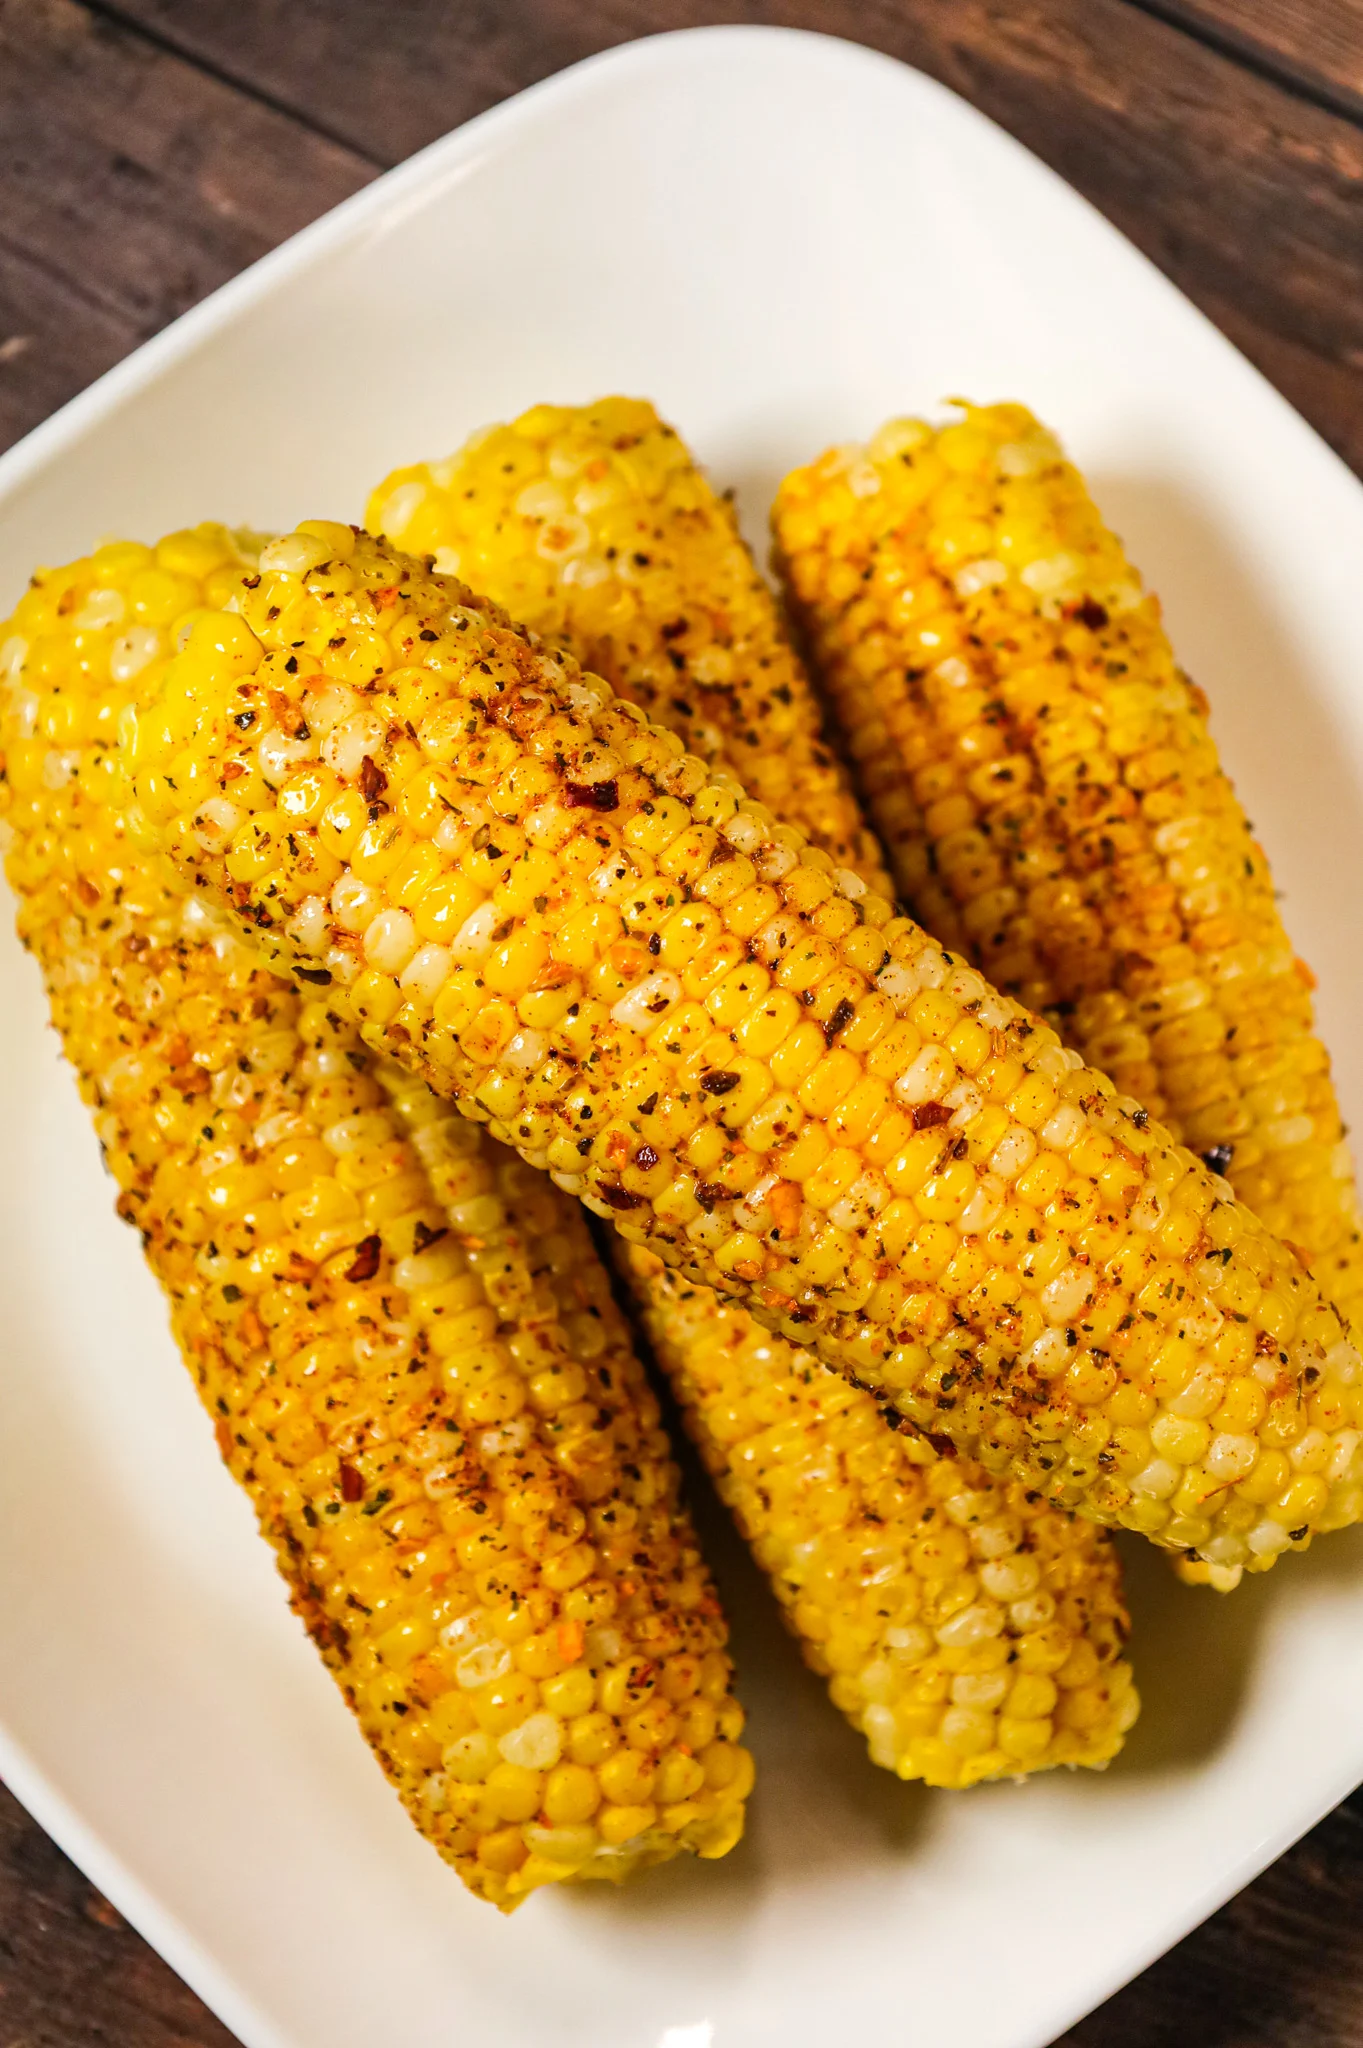 Instant Pot Corn on the Cob is a simple and delicious side dish recipe perfect for serving with a variety of meals.